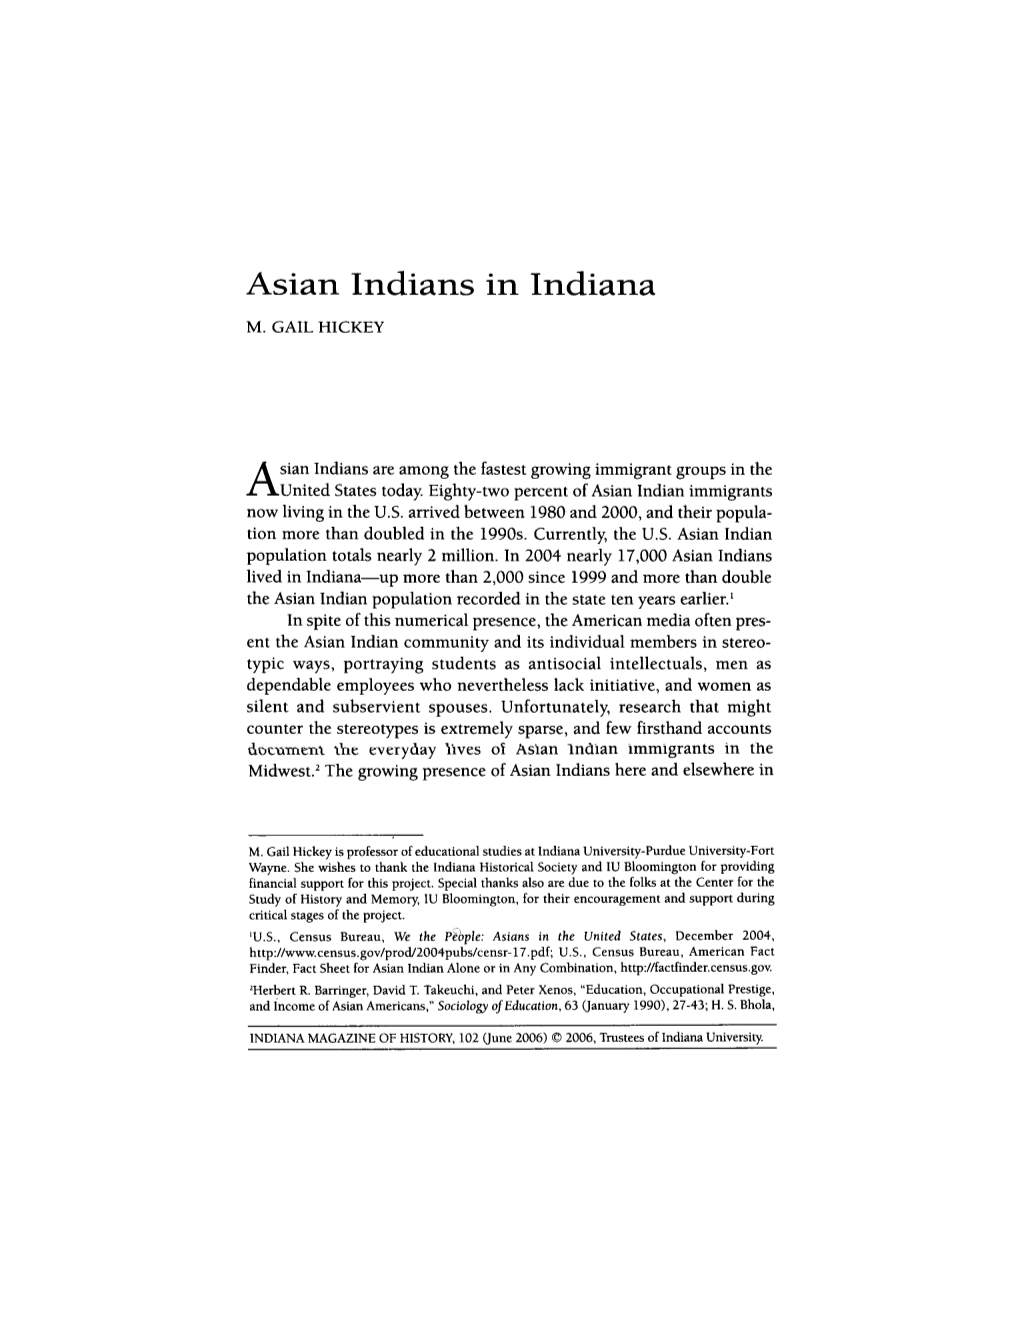 Asian Indians in Indiana